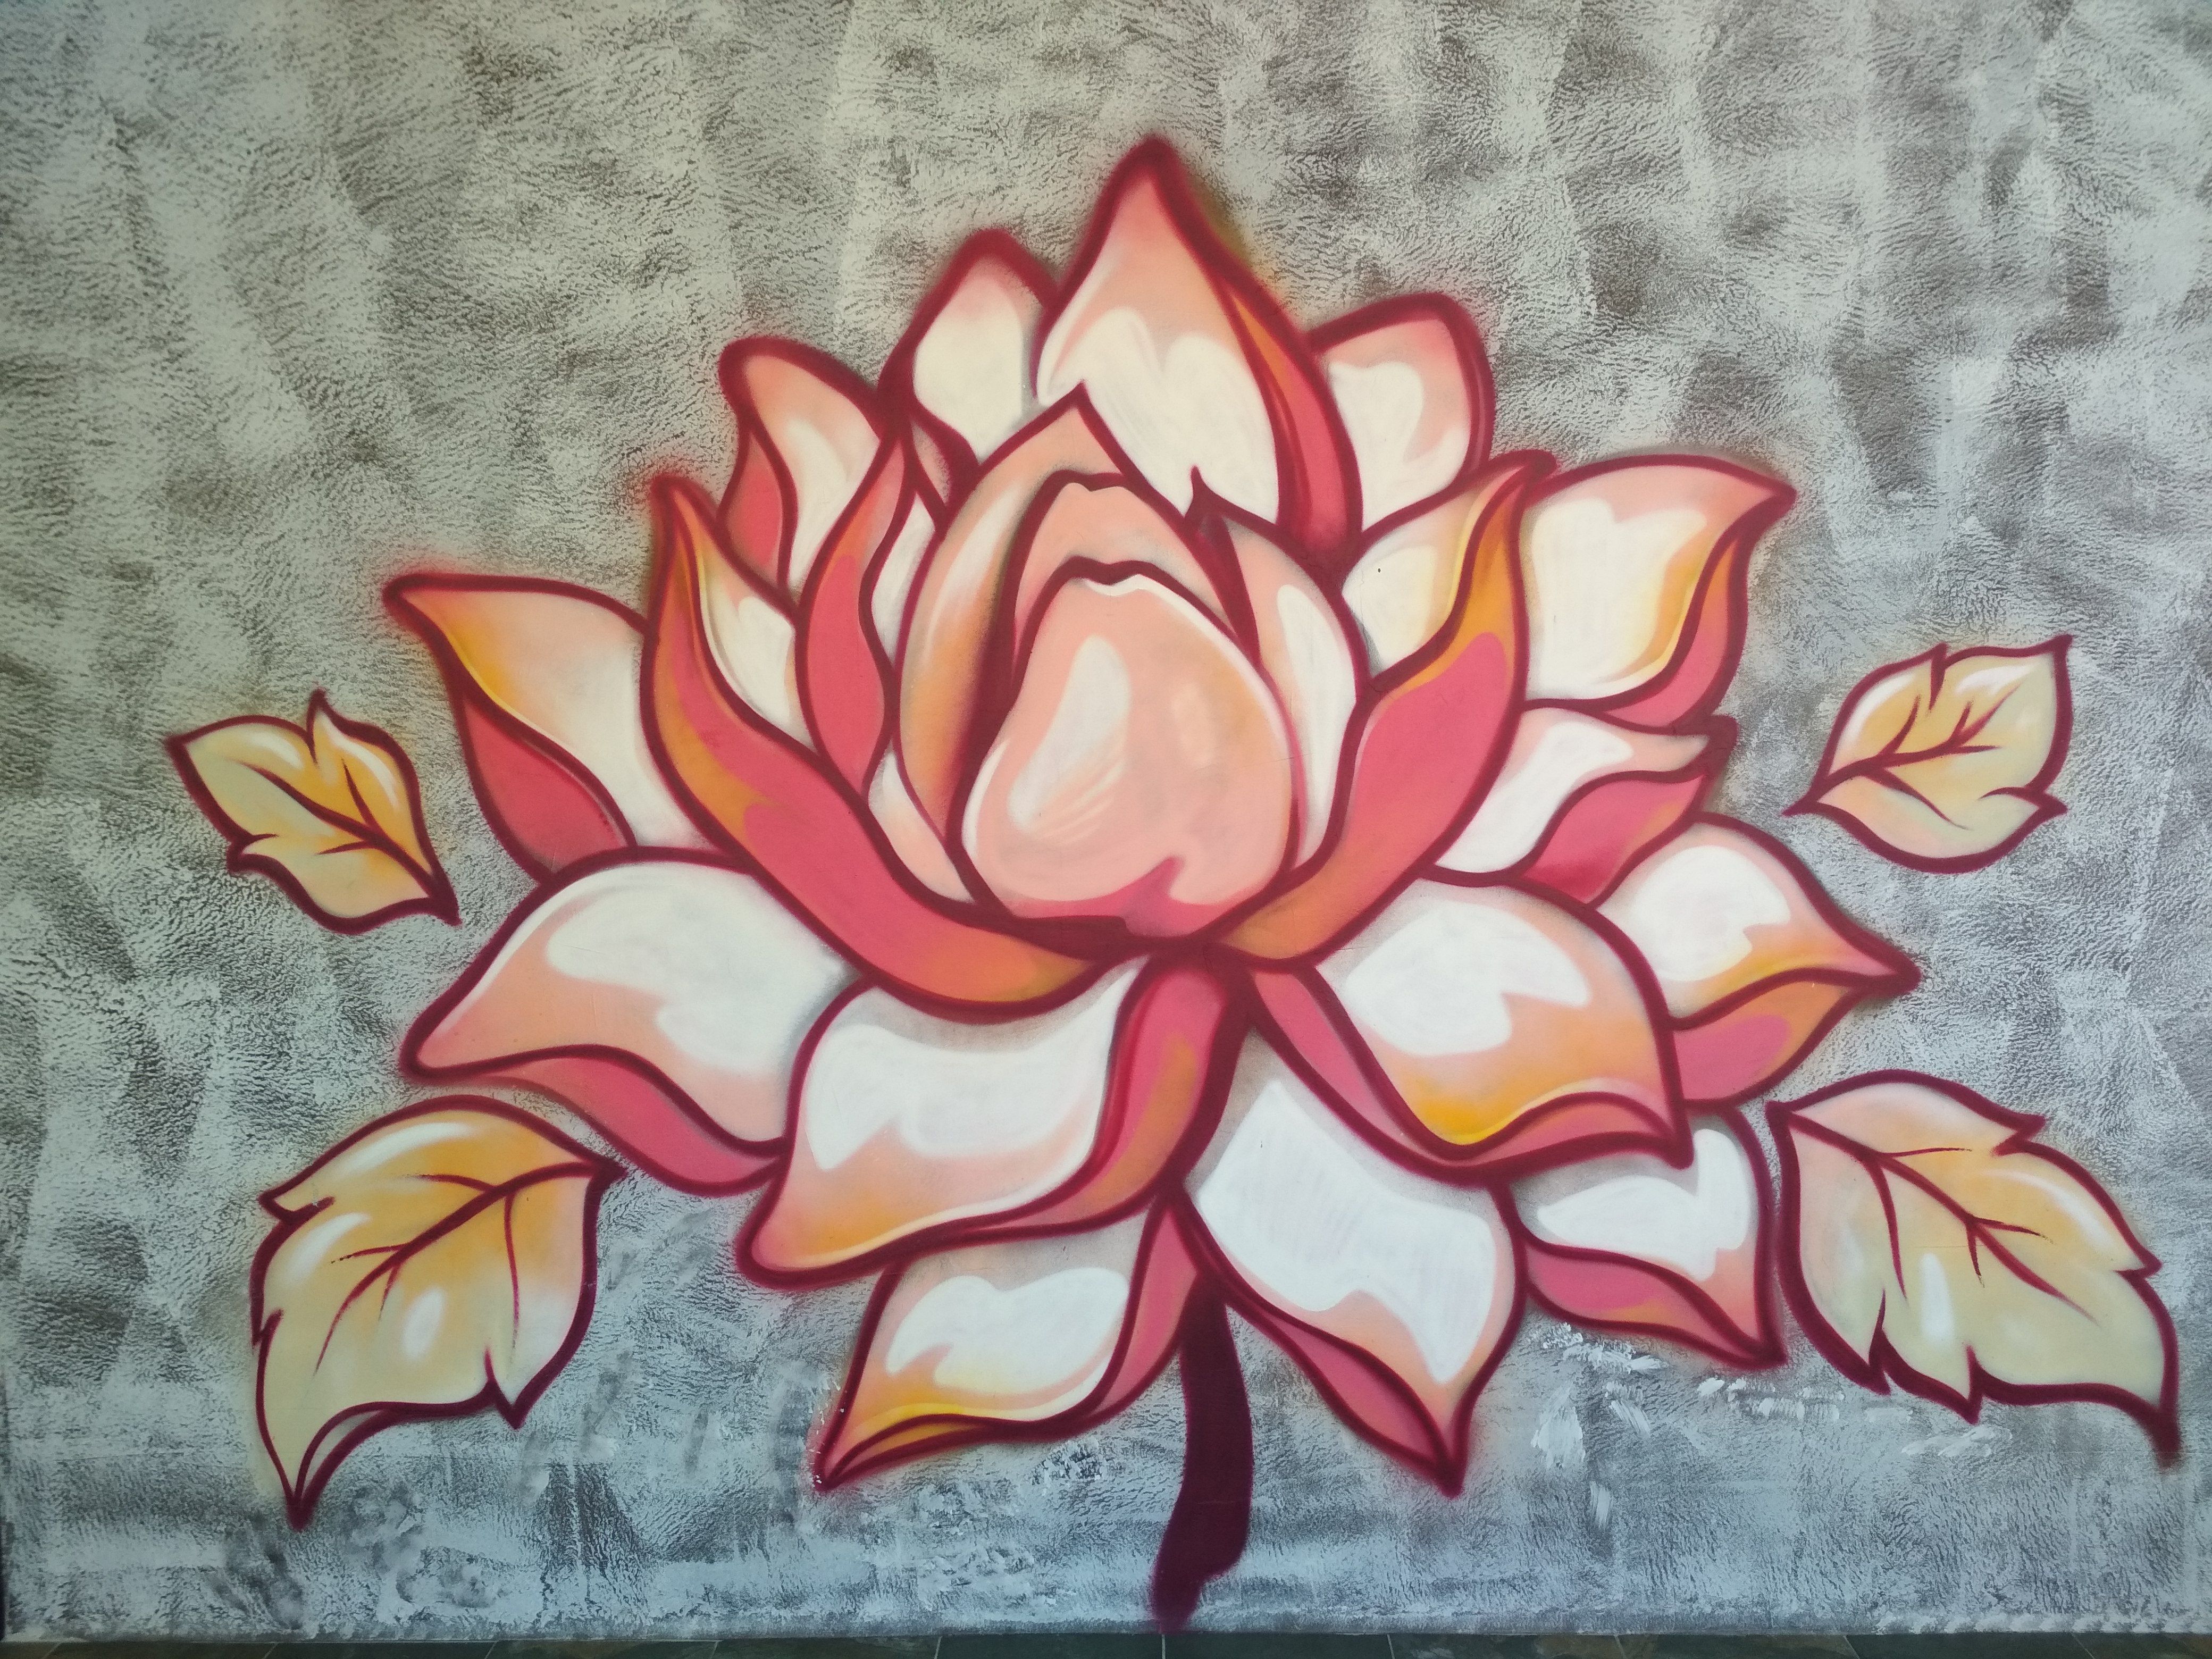 Caption: A photo of a flower, painted on the outside wall of a public toilet in Sopot, Bulgaria.